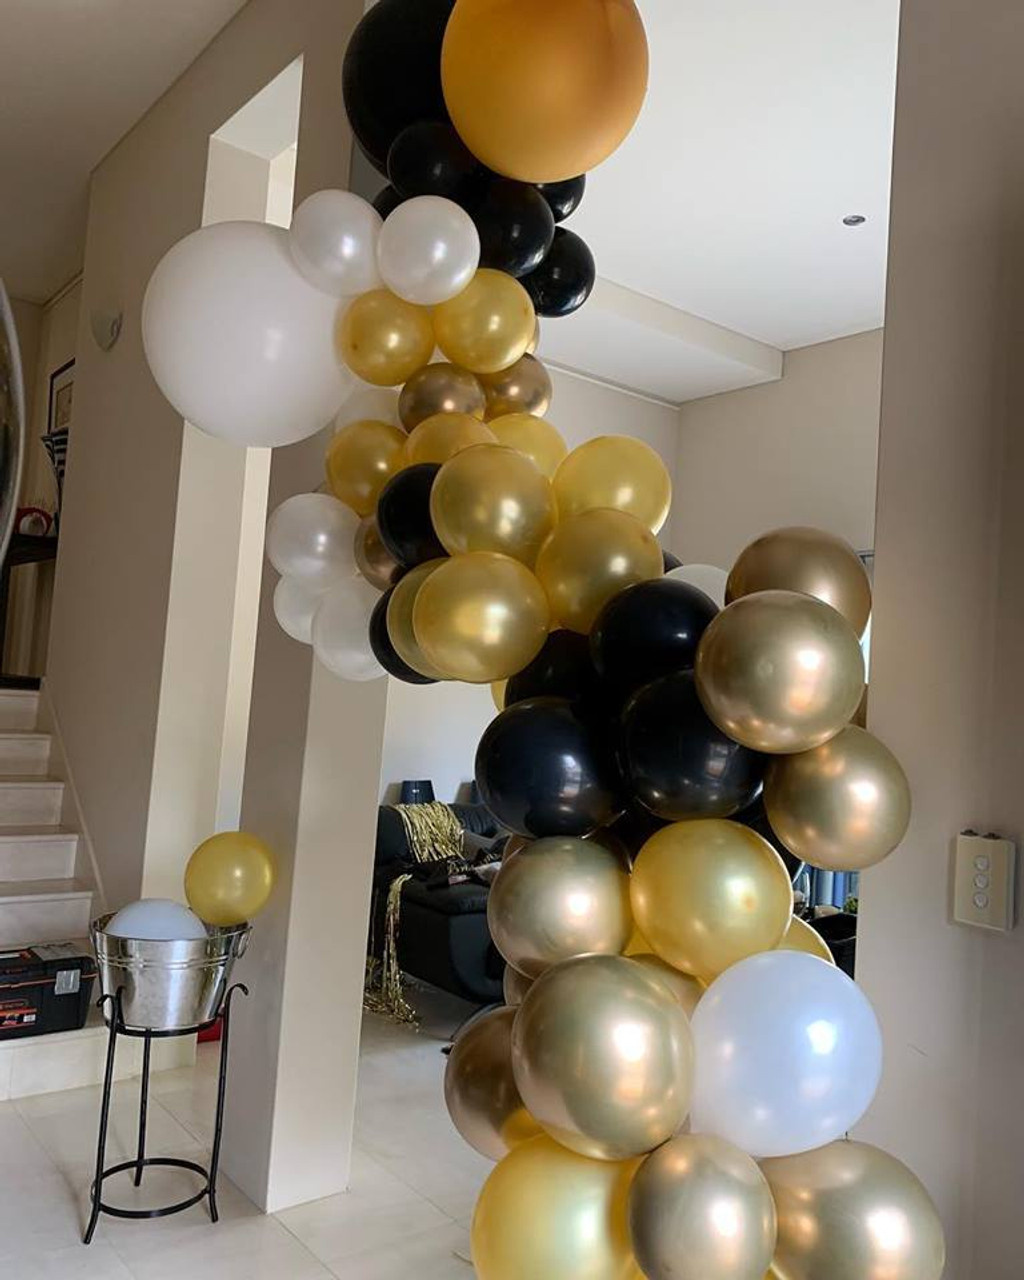 BALLOON GARLAND PREMIUM - 2 METRE (installation &delivery additional) Code- GARLANDPREM2

Includes your choice of latex with additional confetti balloons and/ or chrome finish latex